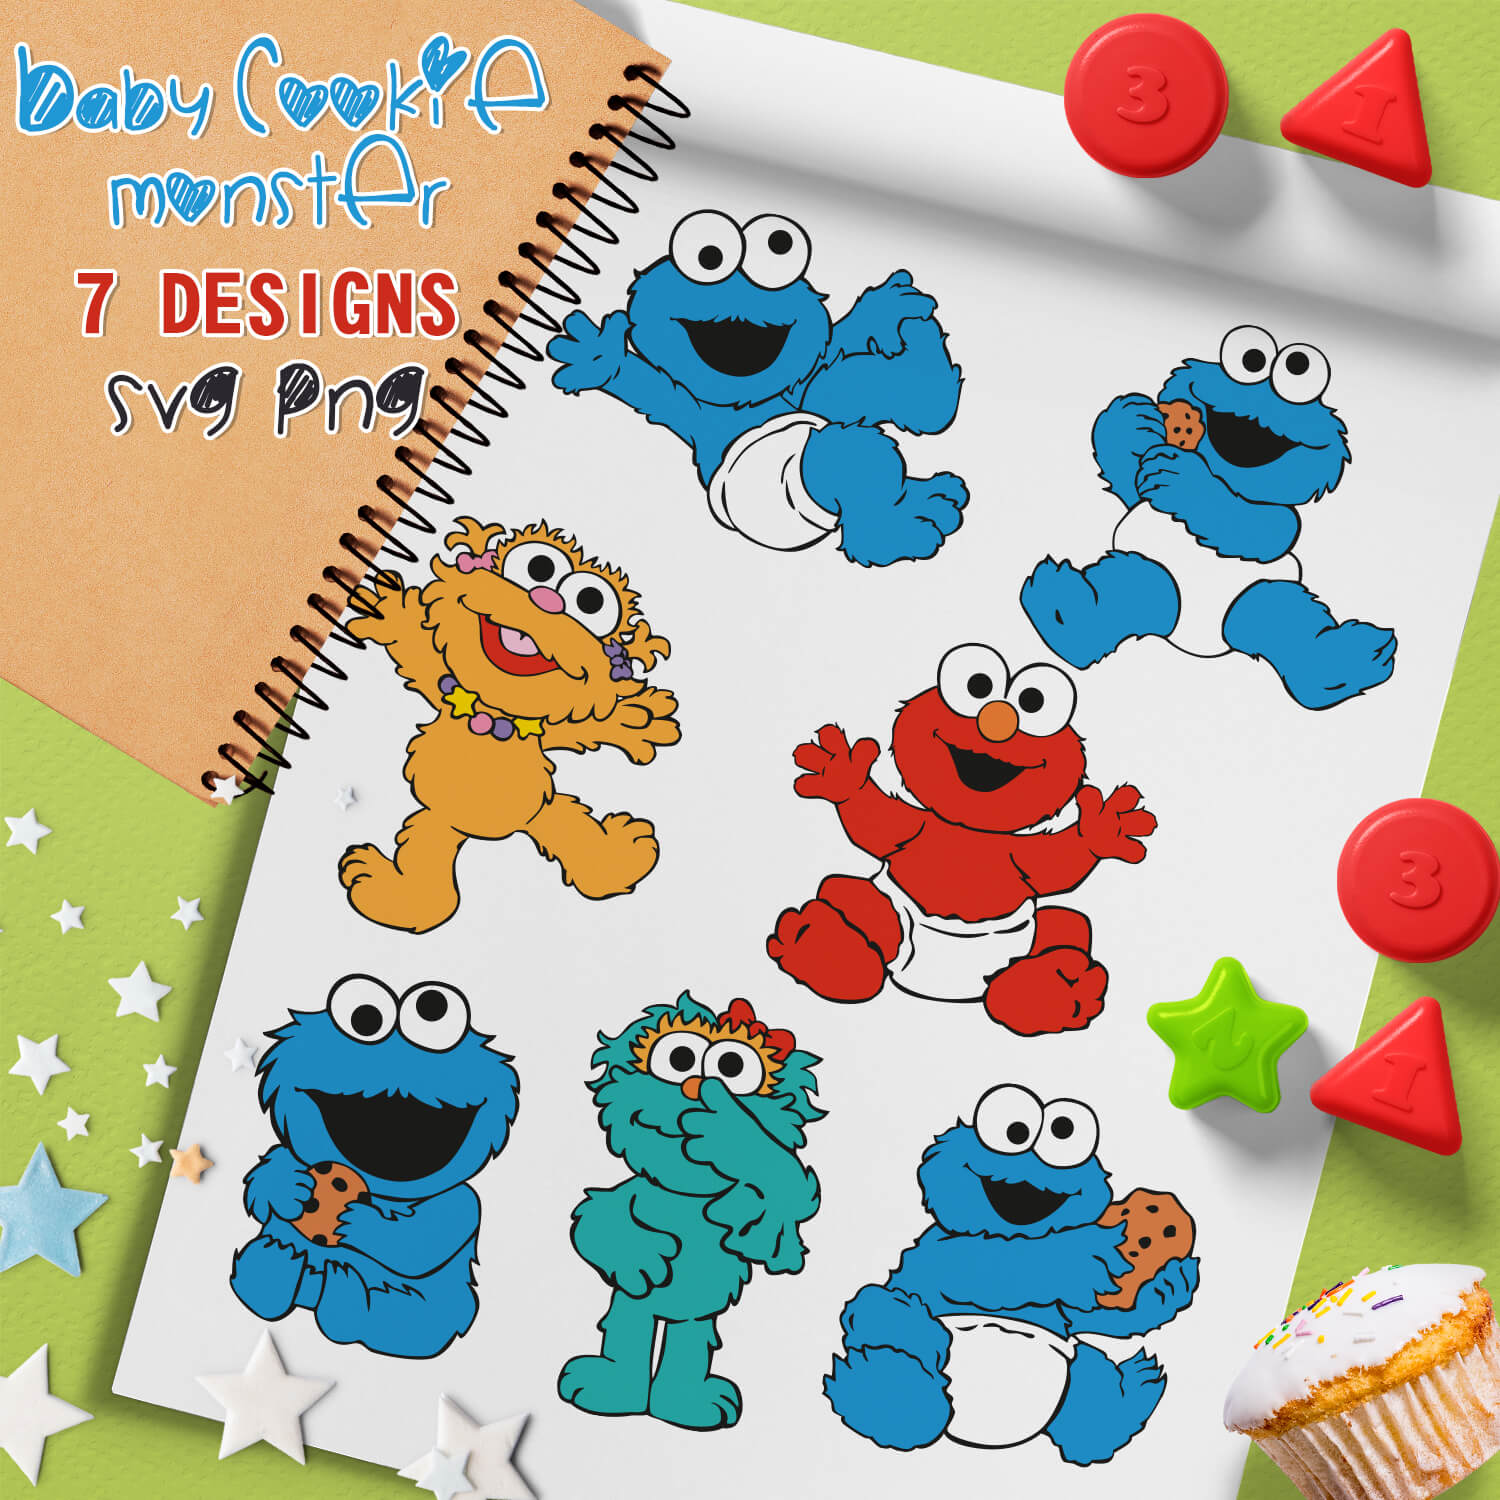 Preview Picture - 7 Designs Baby Cookie Monster.